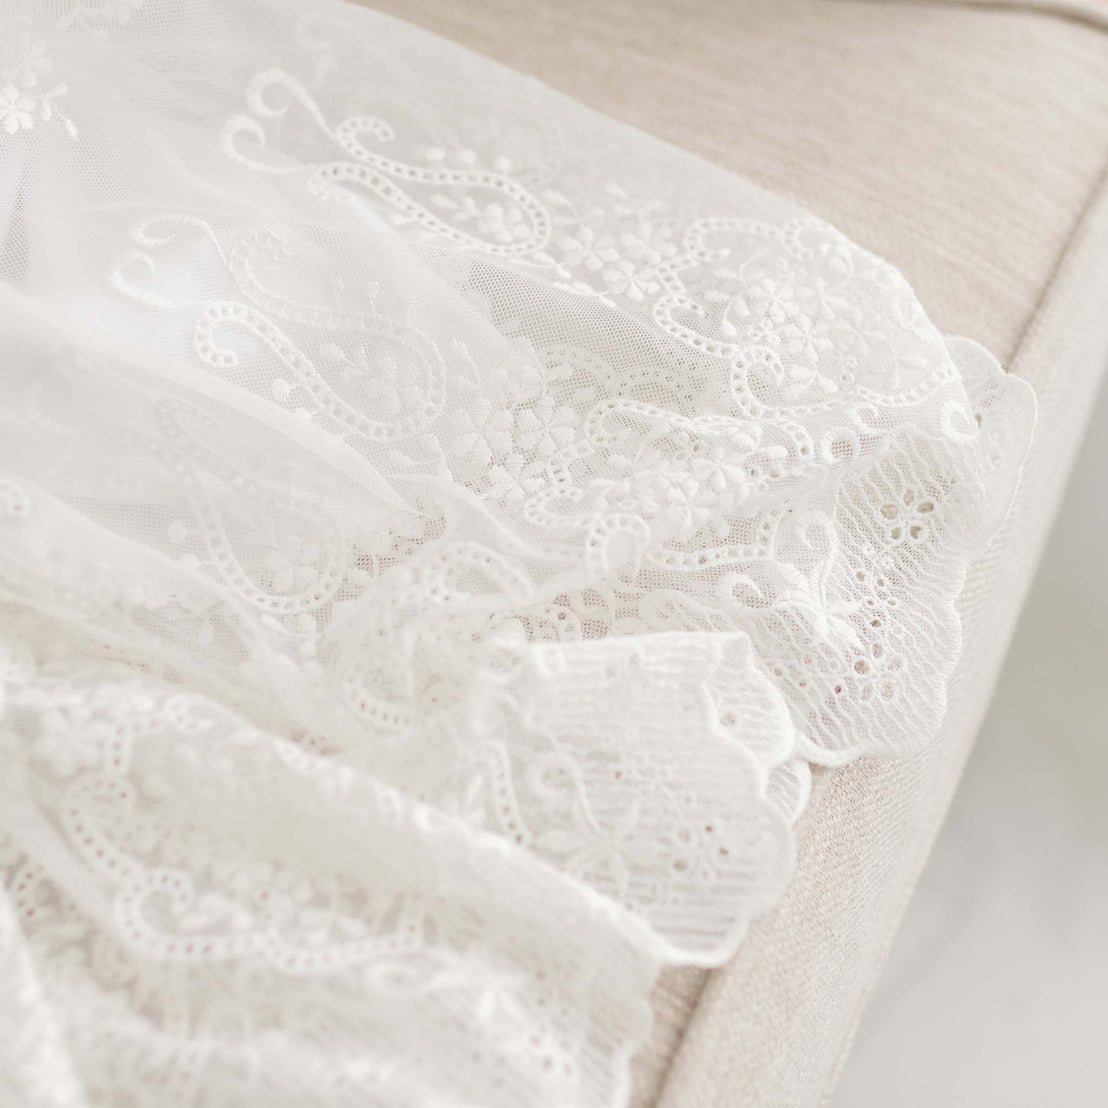 A close-up of the Eliza Blessing Gown draped over a soft beige chair, showcasing intricate floral patterns and embroidery details suitable for a christening or baptism.